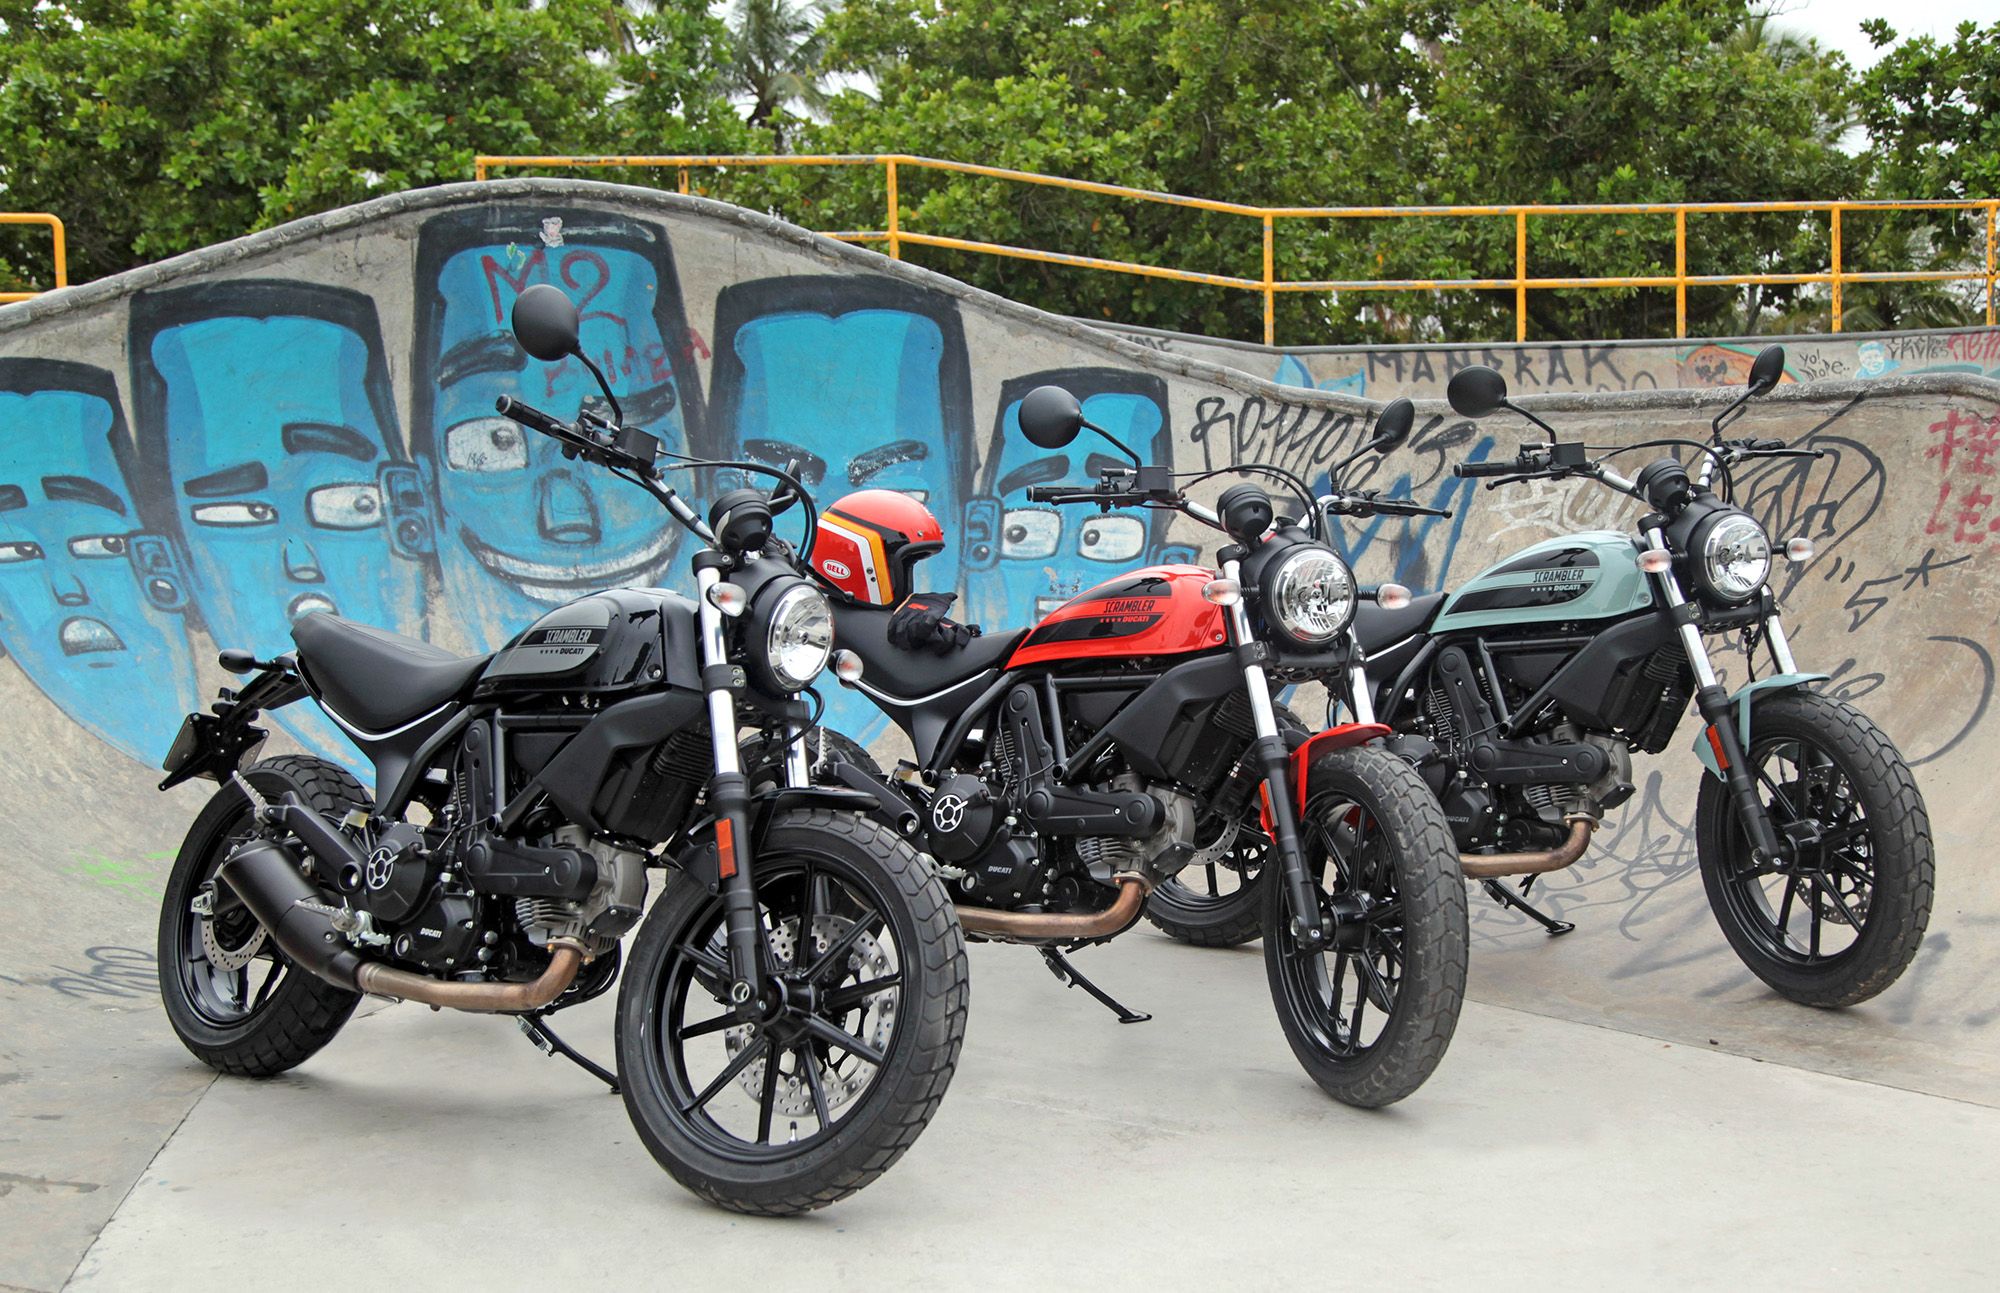 Four Ducati 400 Scramblers lined up on a skate ramp